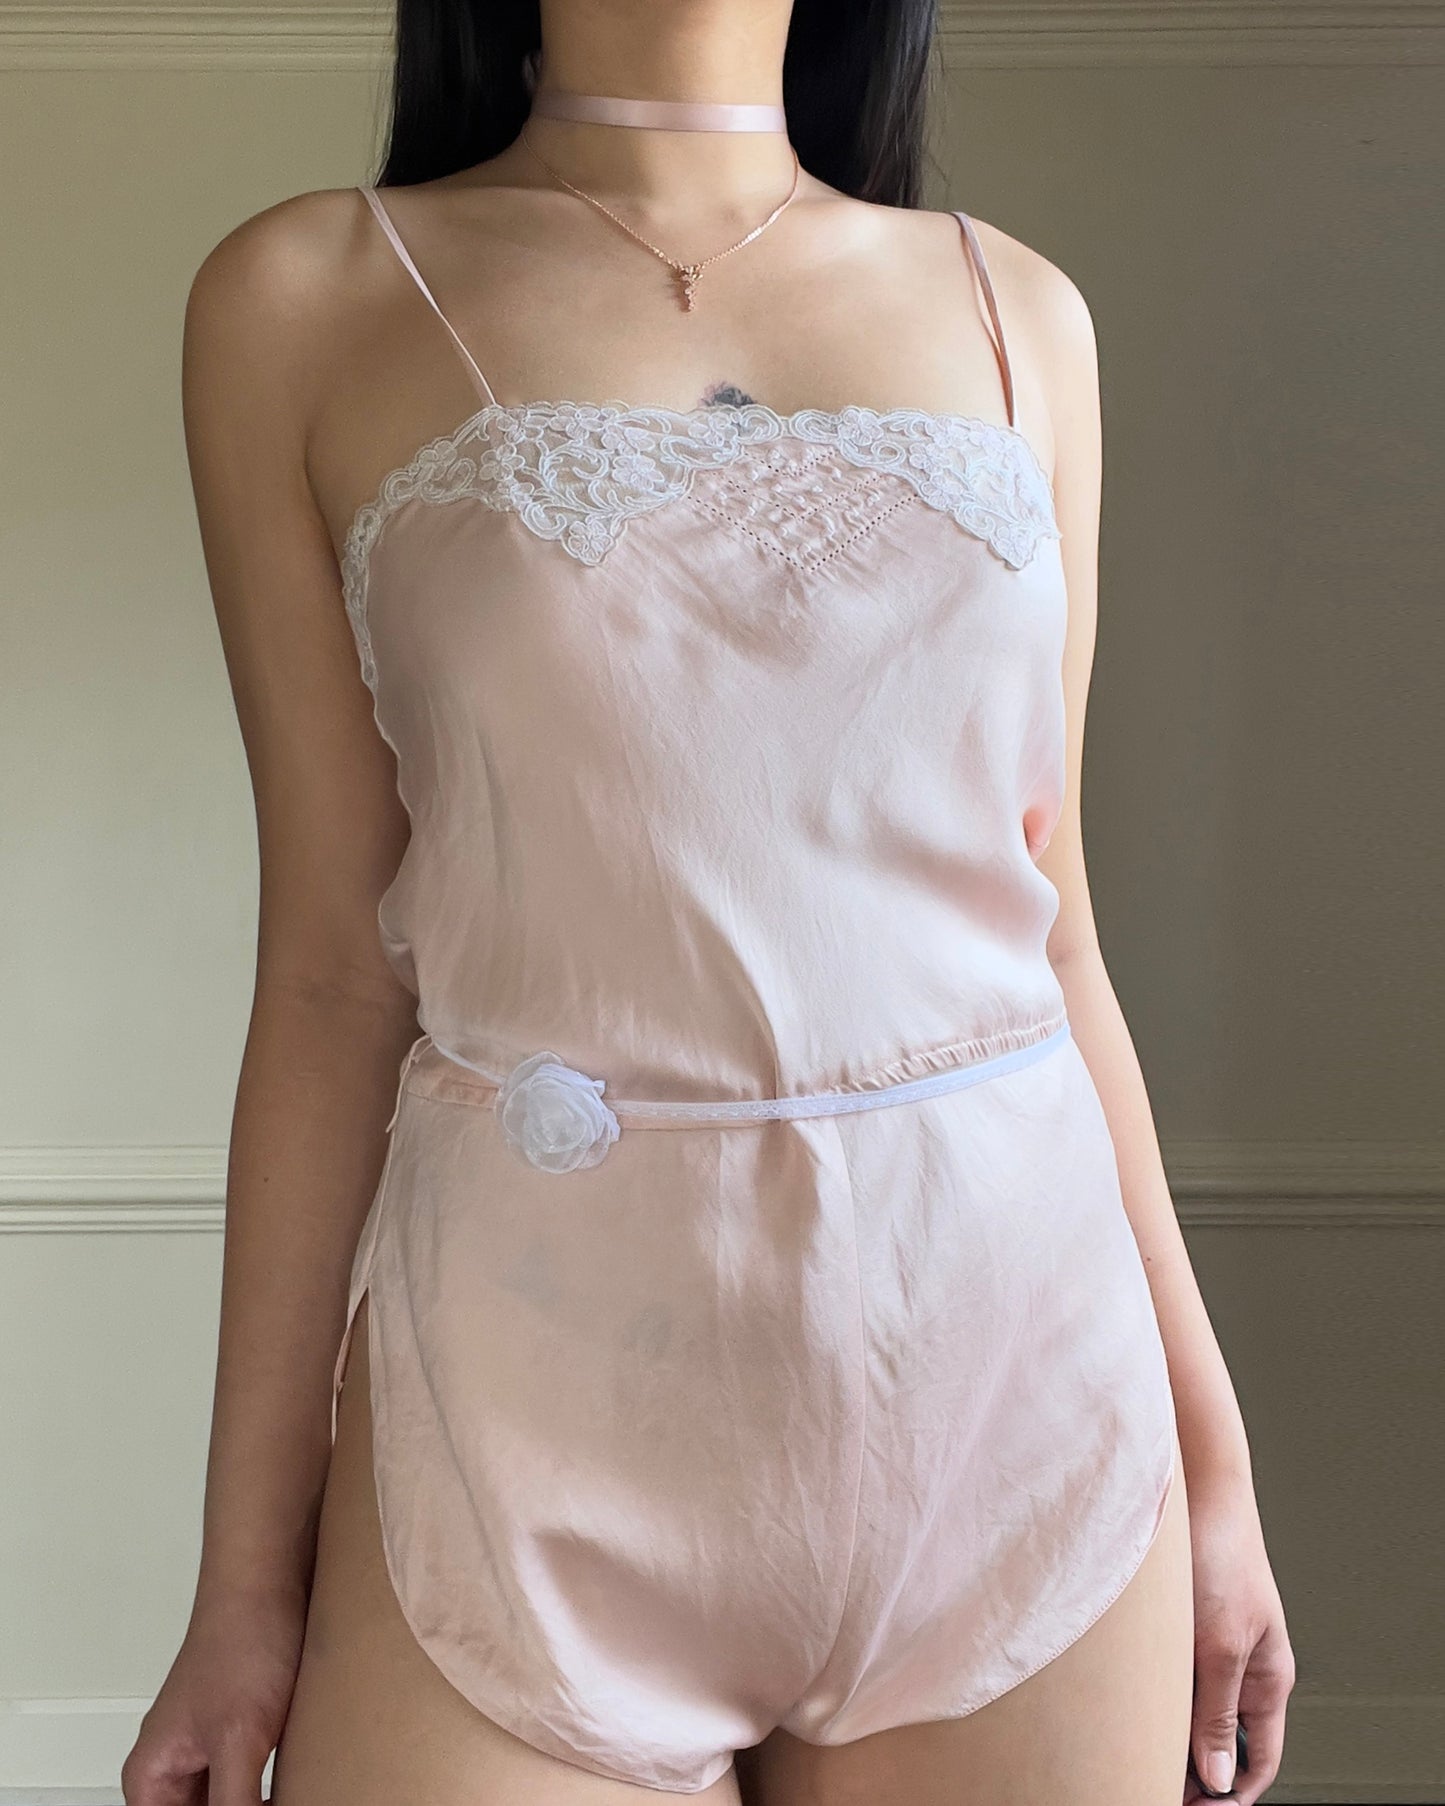 Vintage 1920’s Style Blushed Teddy Romper featuring Delicate Floral Lace Details